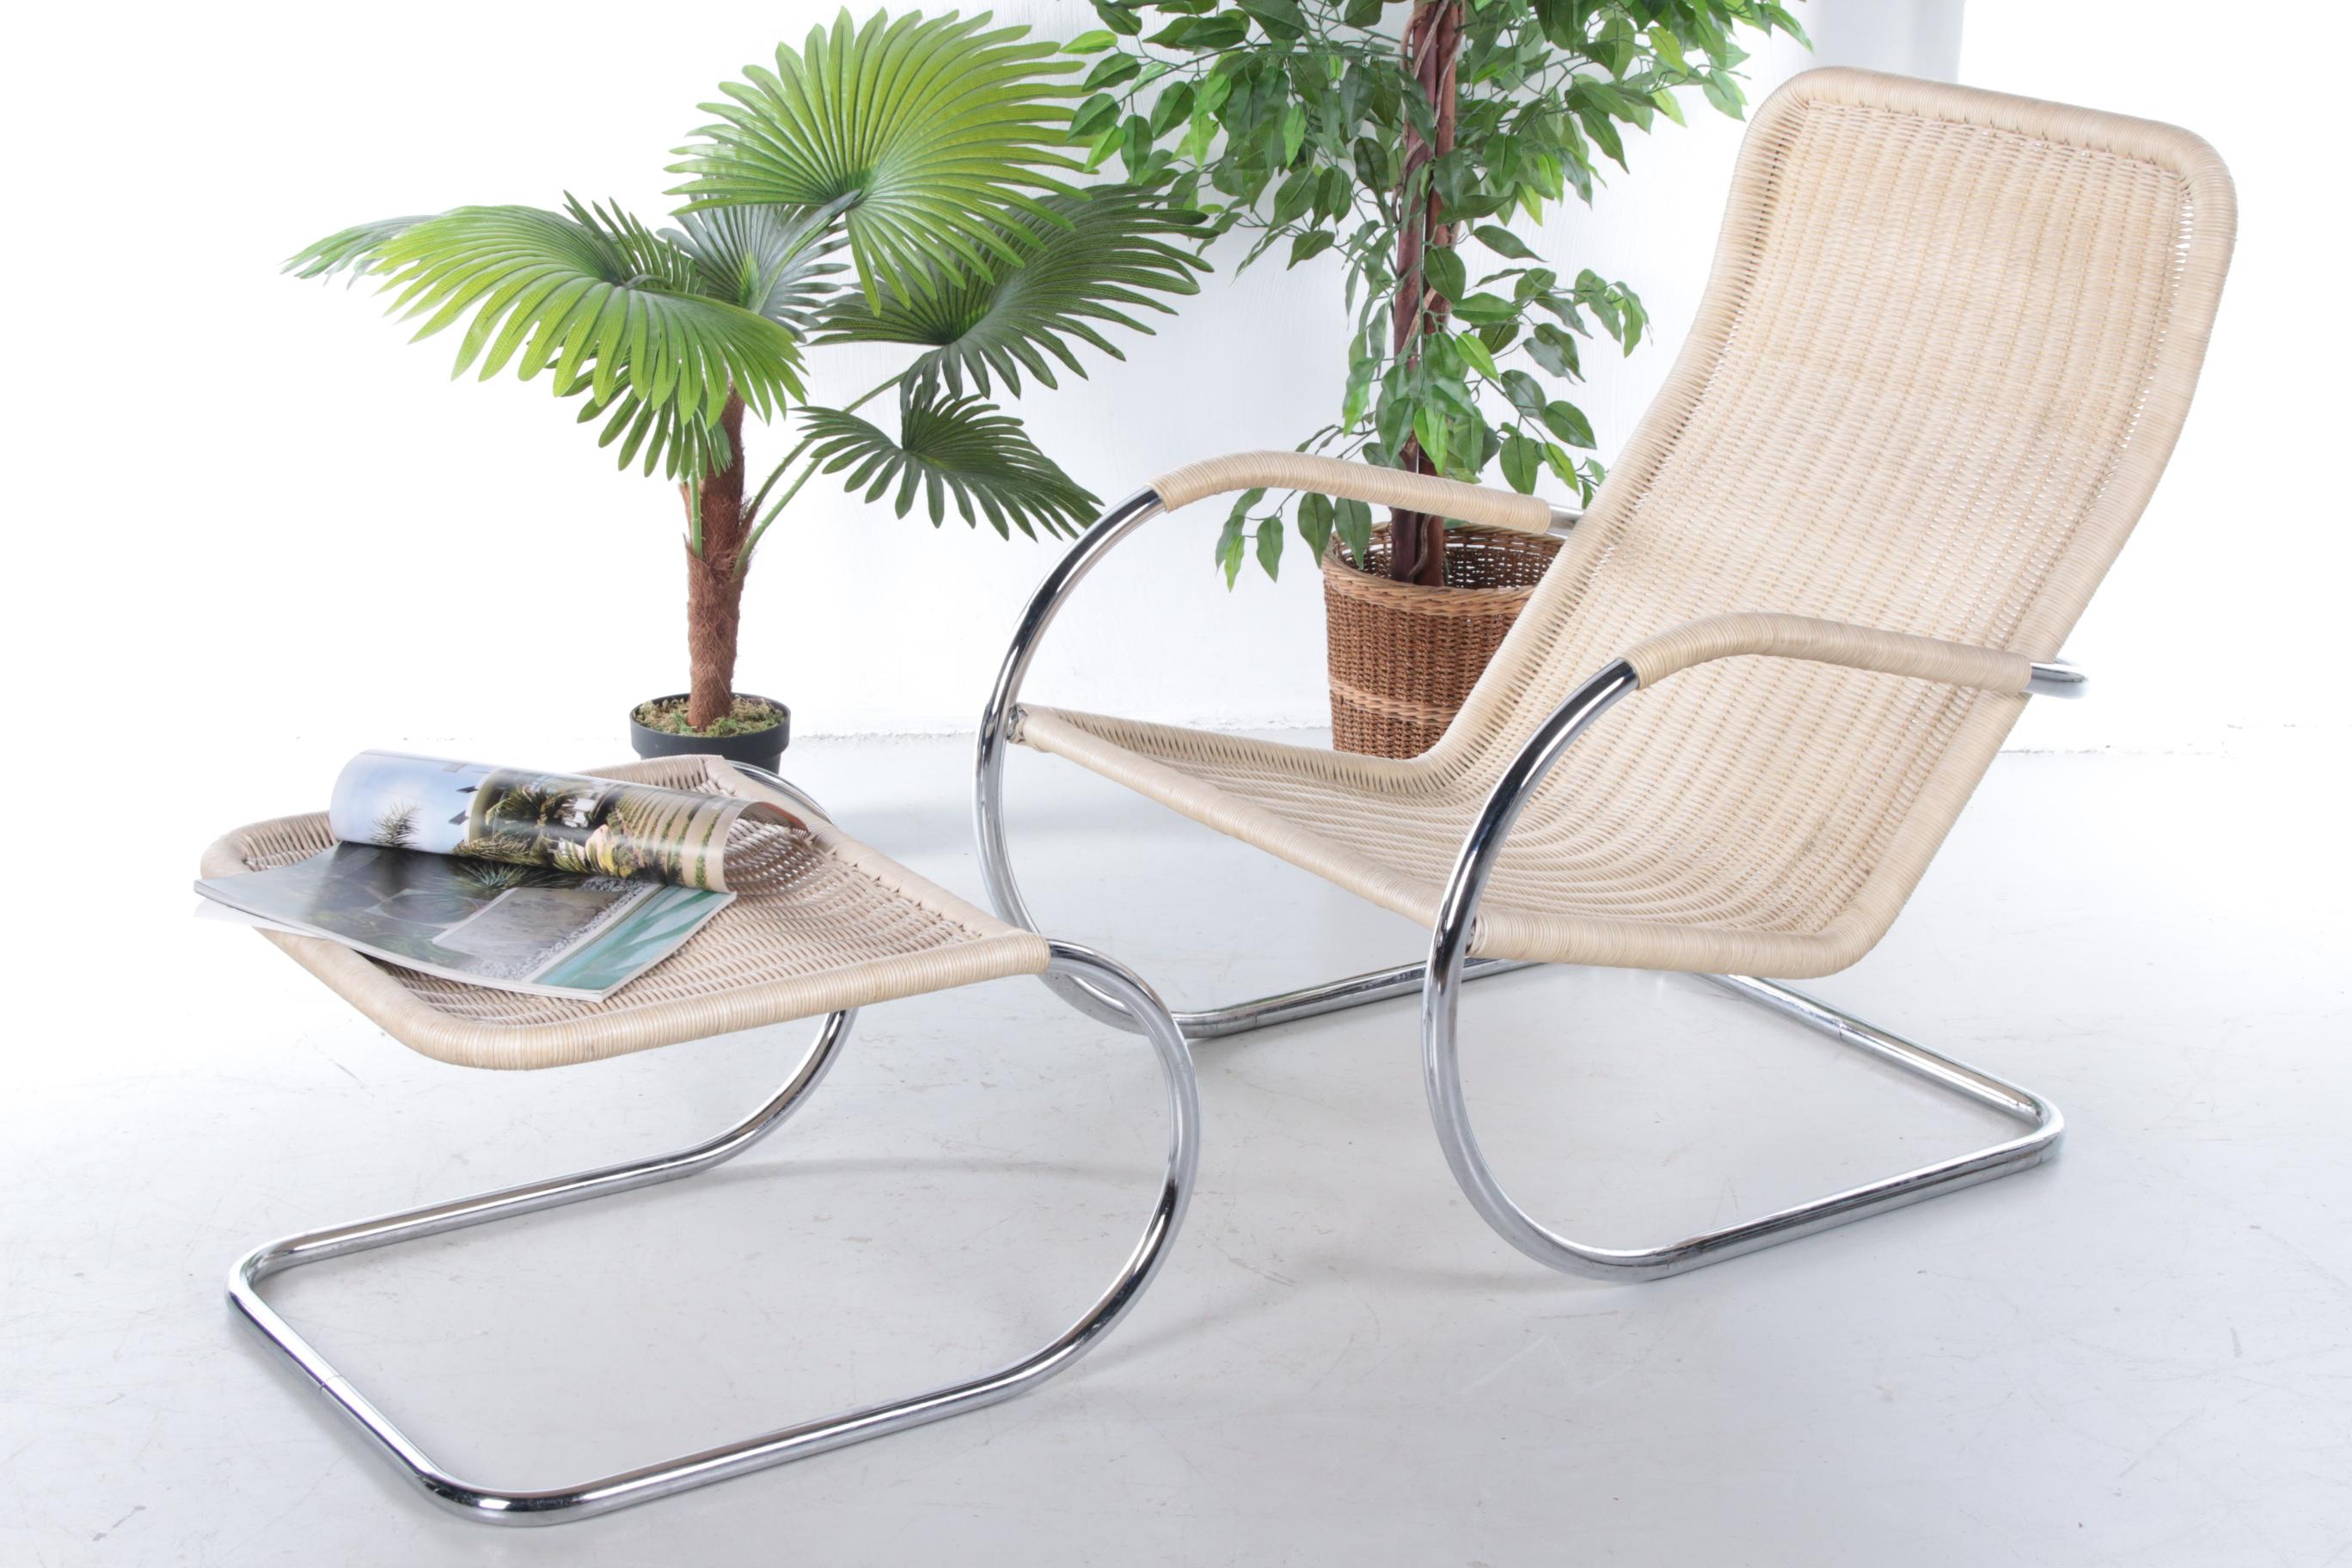 Vintage relax chair with ottoman from Tecta, design by Anton Lorenz Germany


This is a beautiful relax chair with a ottoman.

The design is by Anton Lorenz in the 1930s

Beautiful and timeless design with elegantly curved steel tubes. The